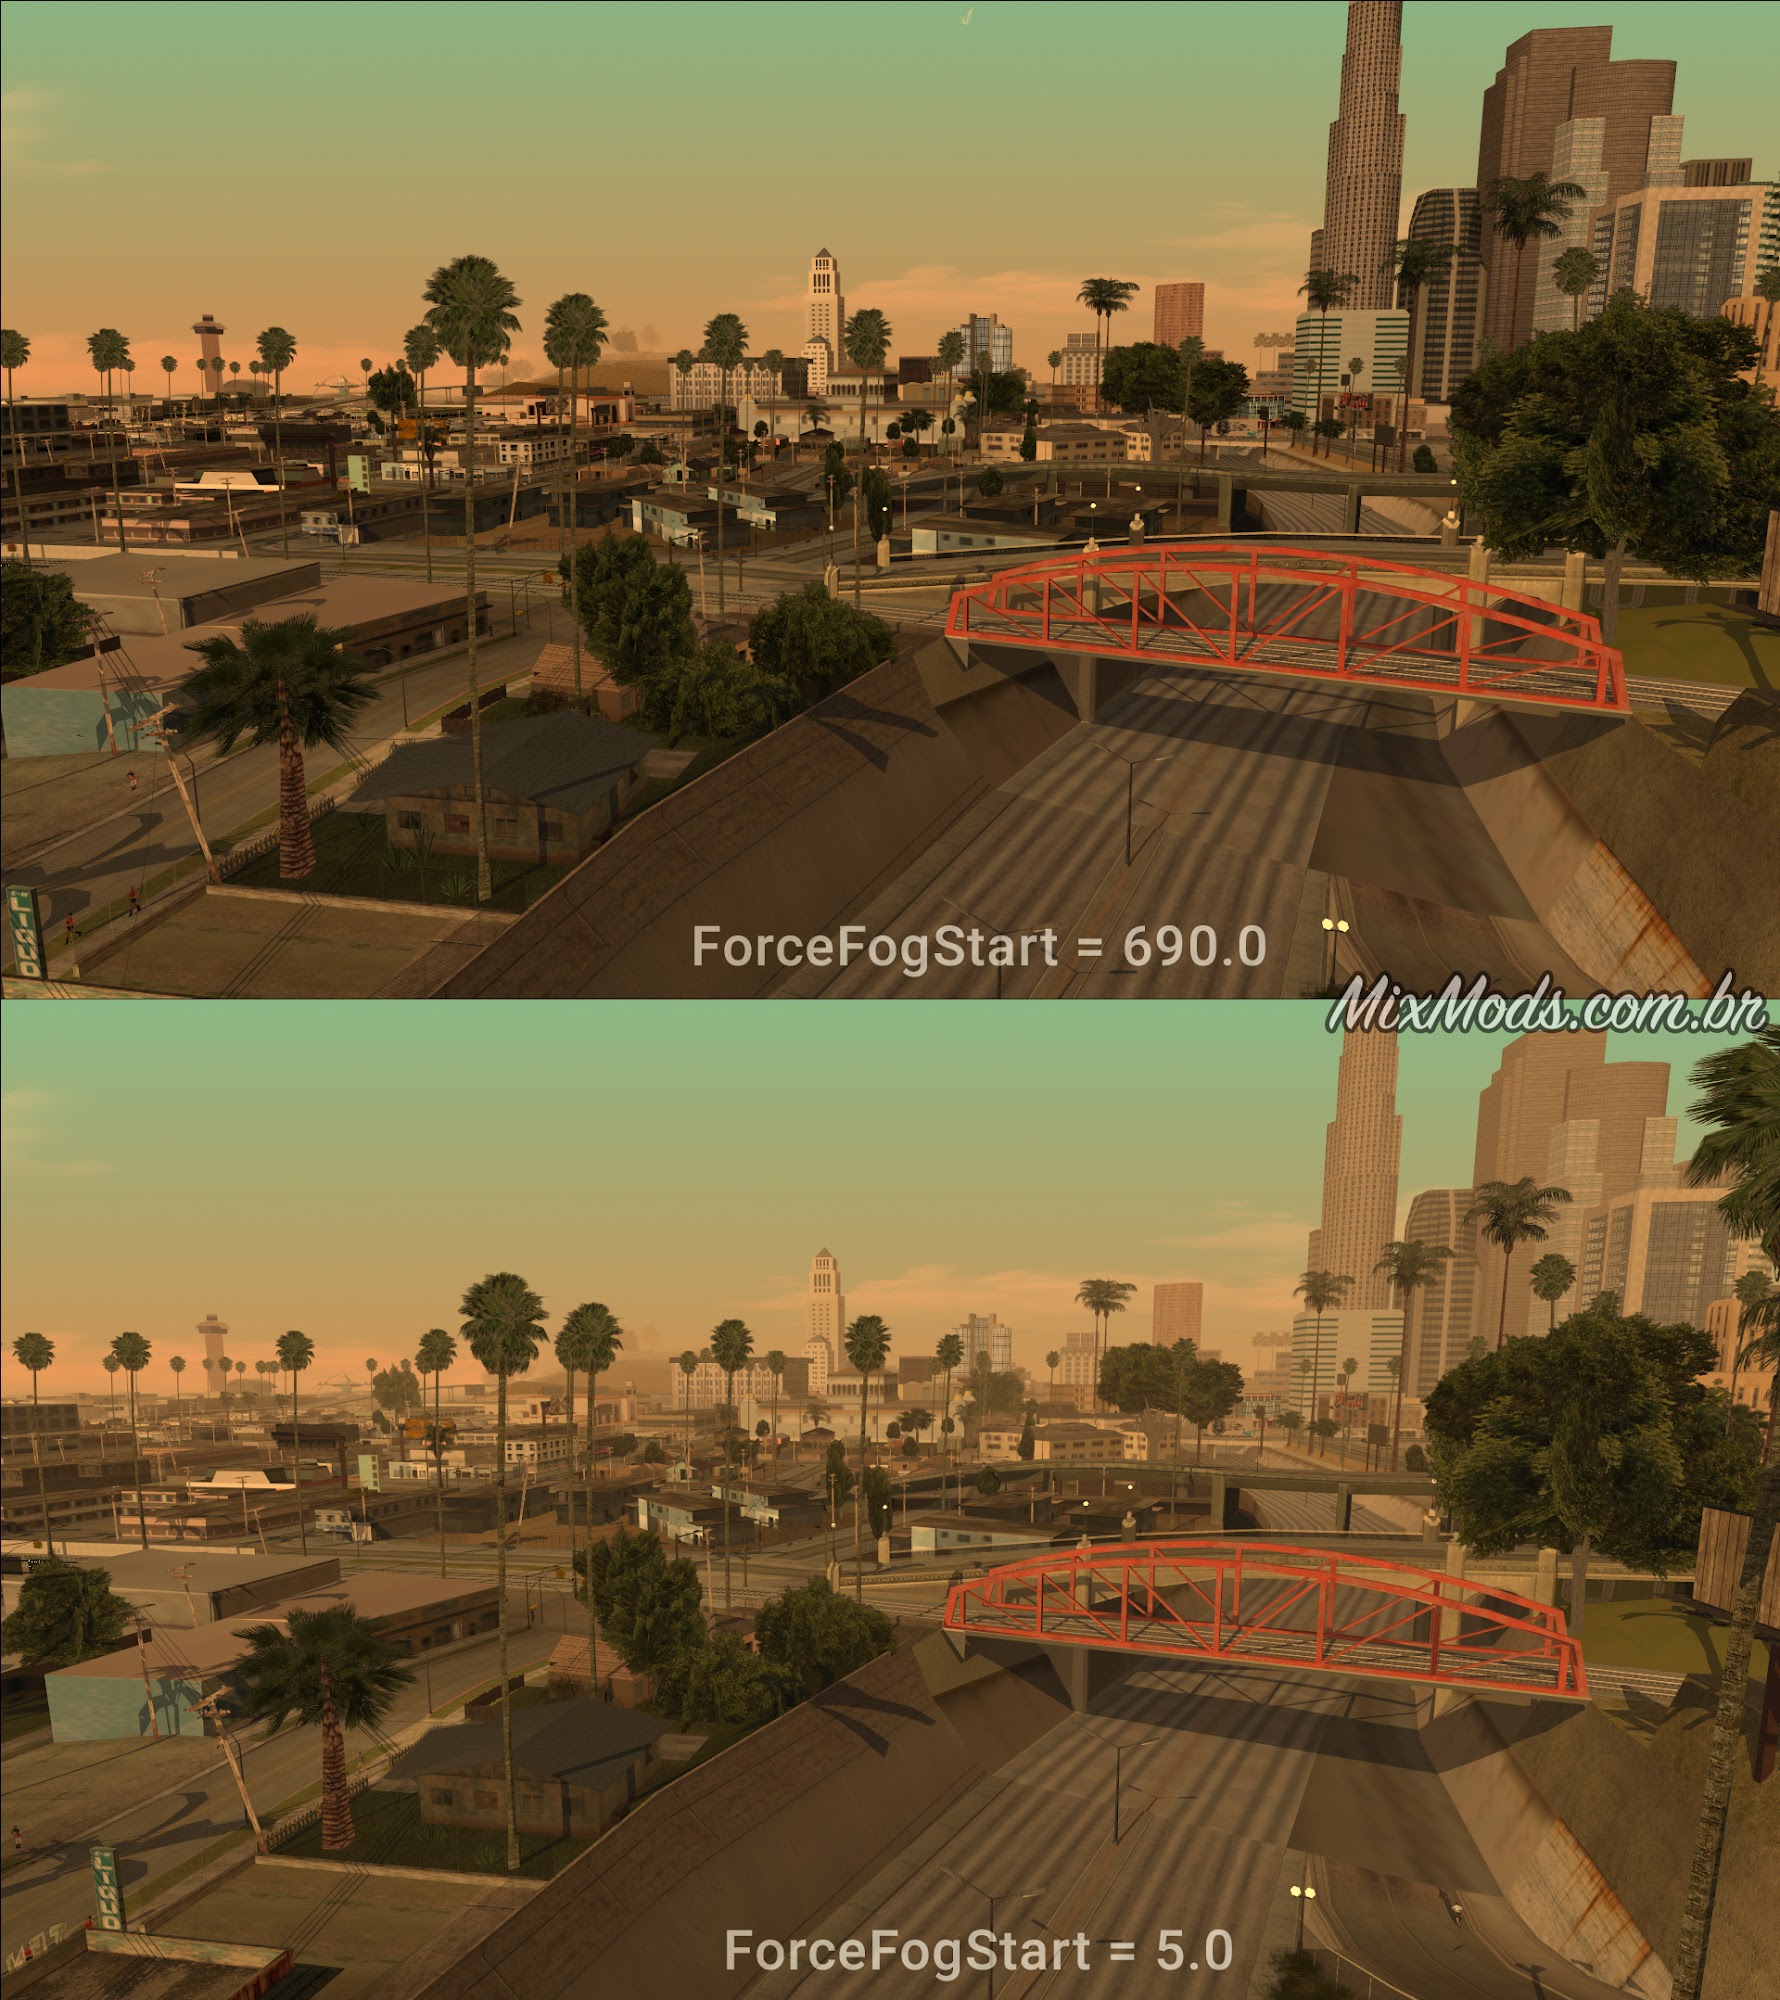 Graphic mods for GTA San Andreas (iOS, Android): 122 ENB mods for